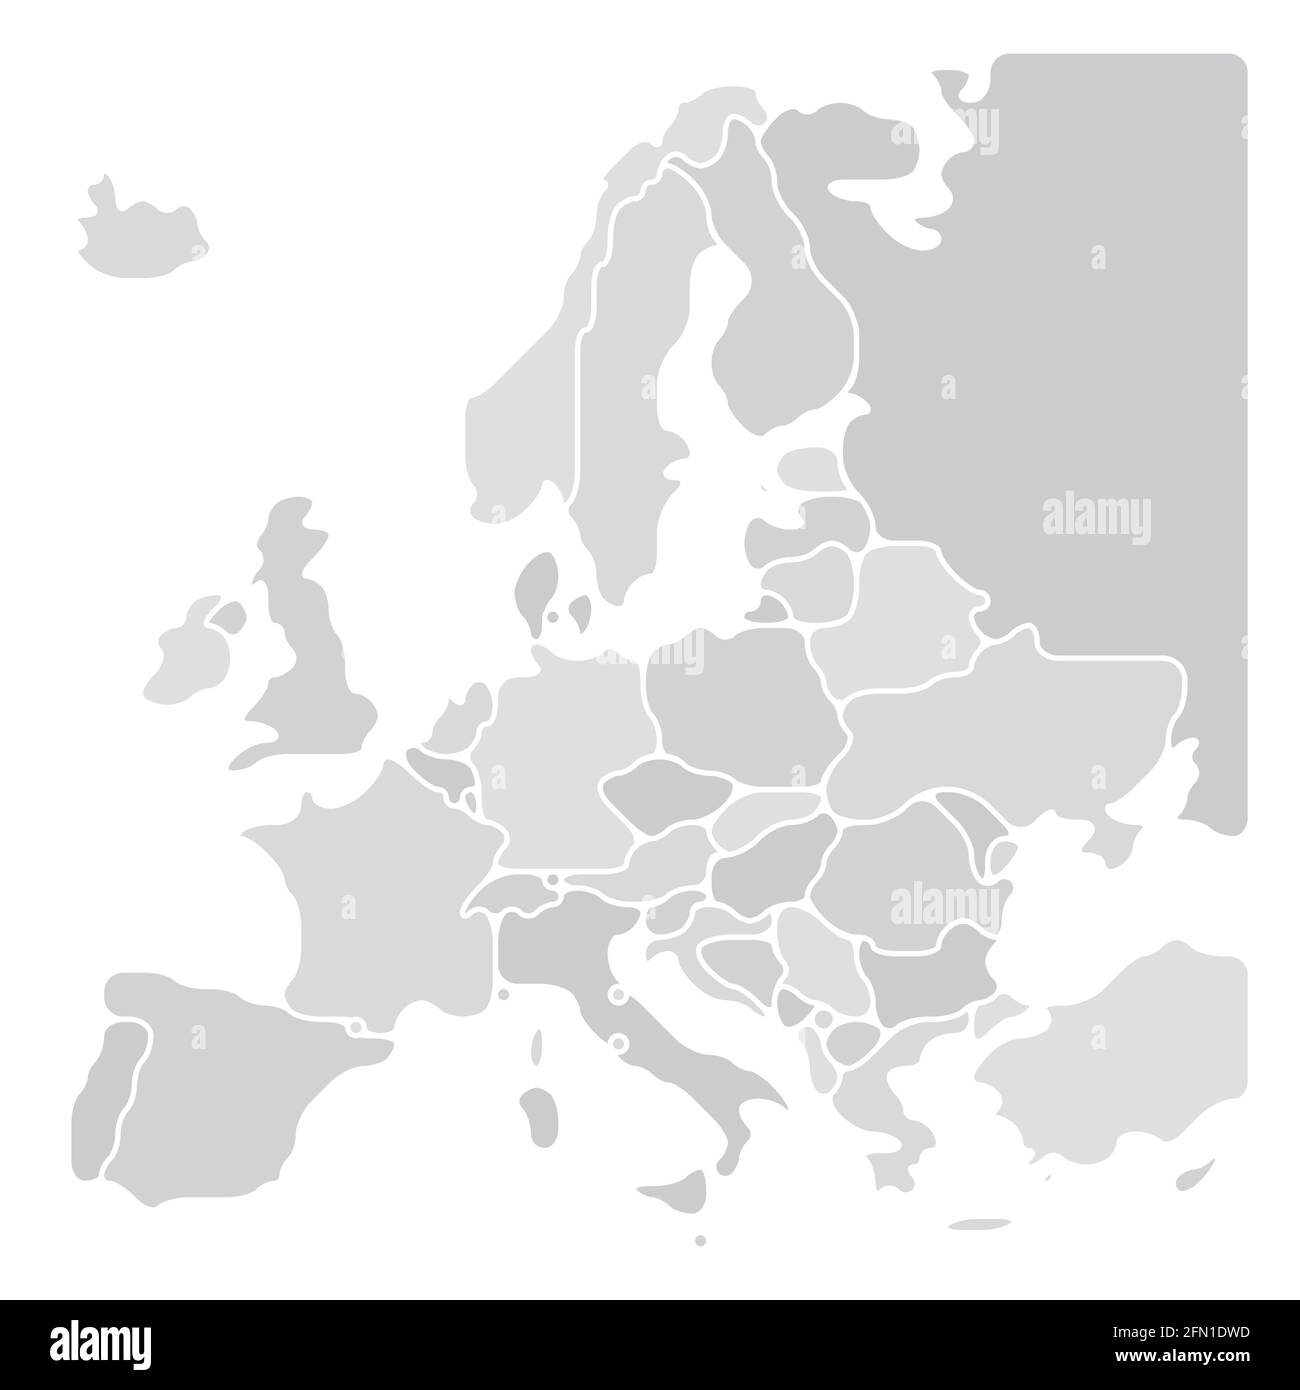 Simplified smooth map of Europe Stock Vector